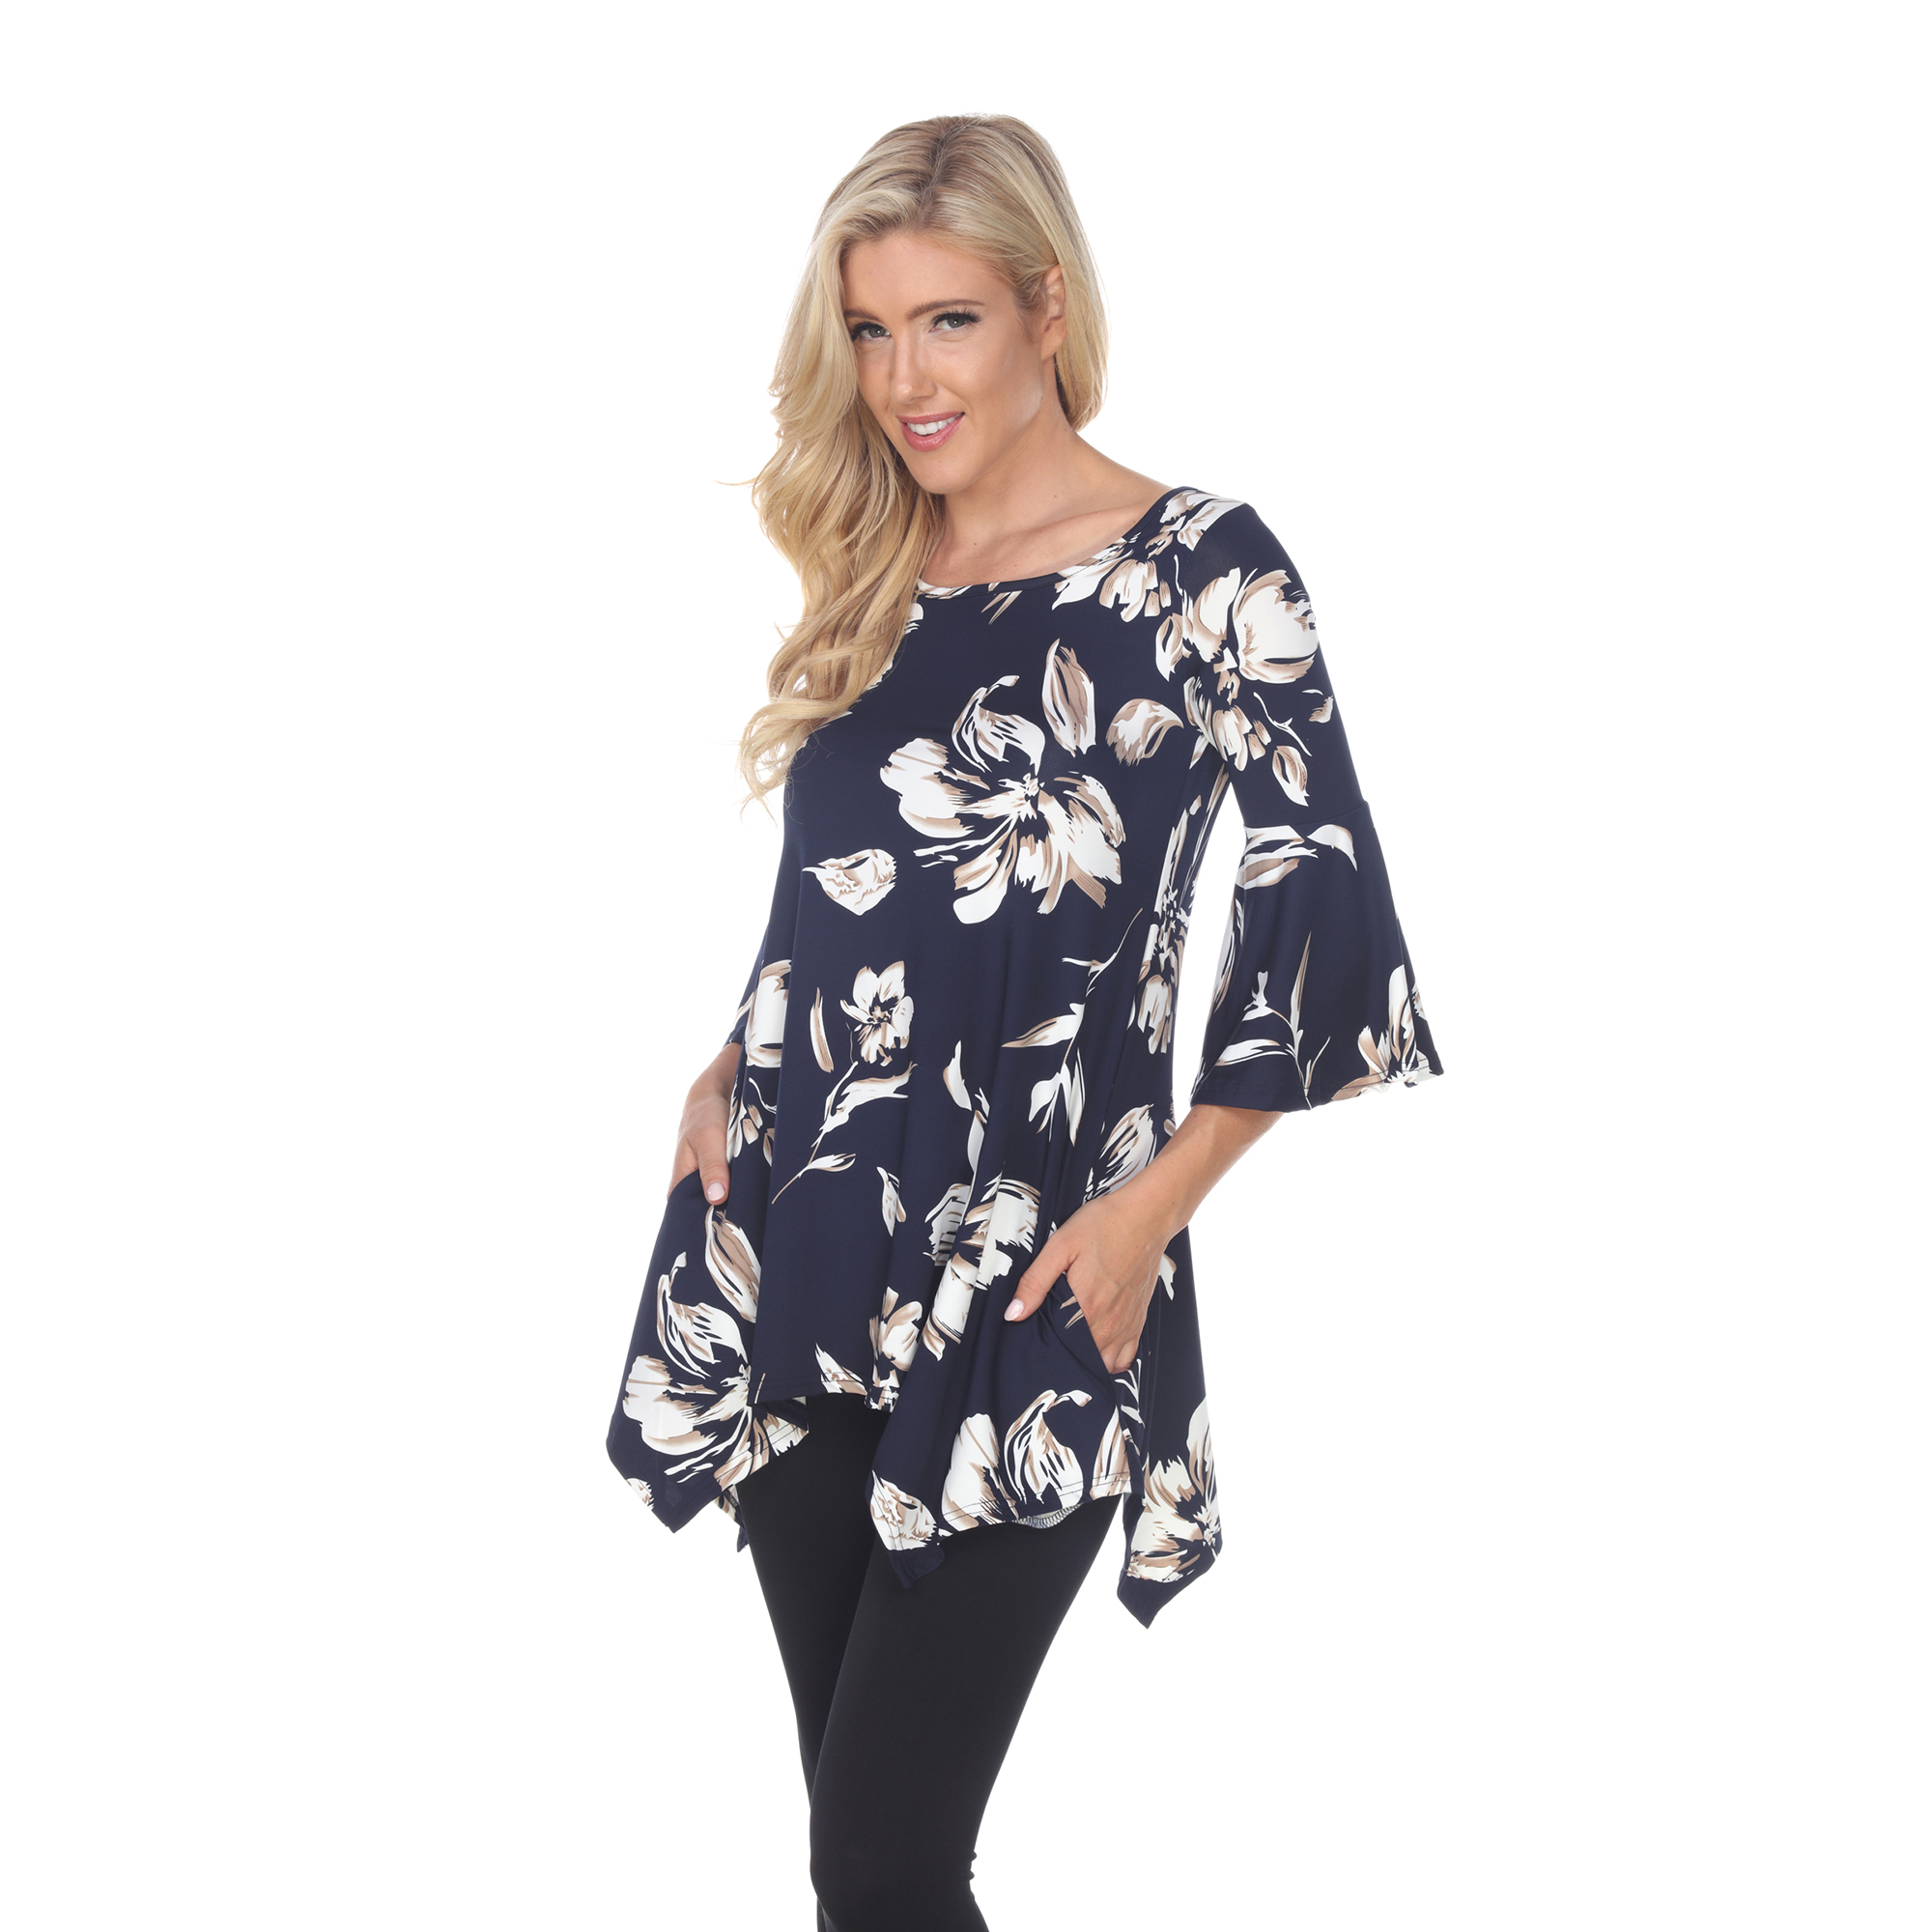 White Mark Women's Floral Print Quarter Sleeve Tunic Top With Pockets - Black, 3X